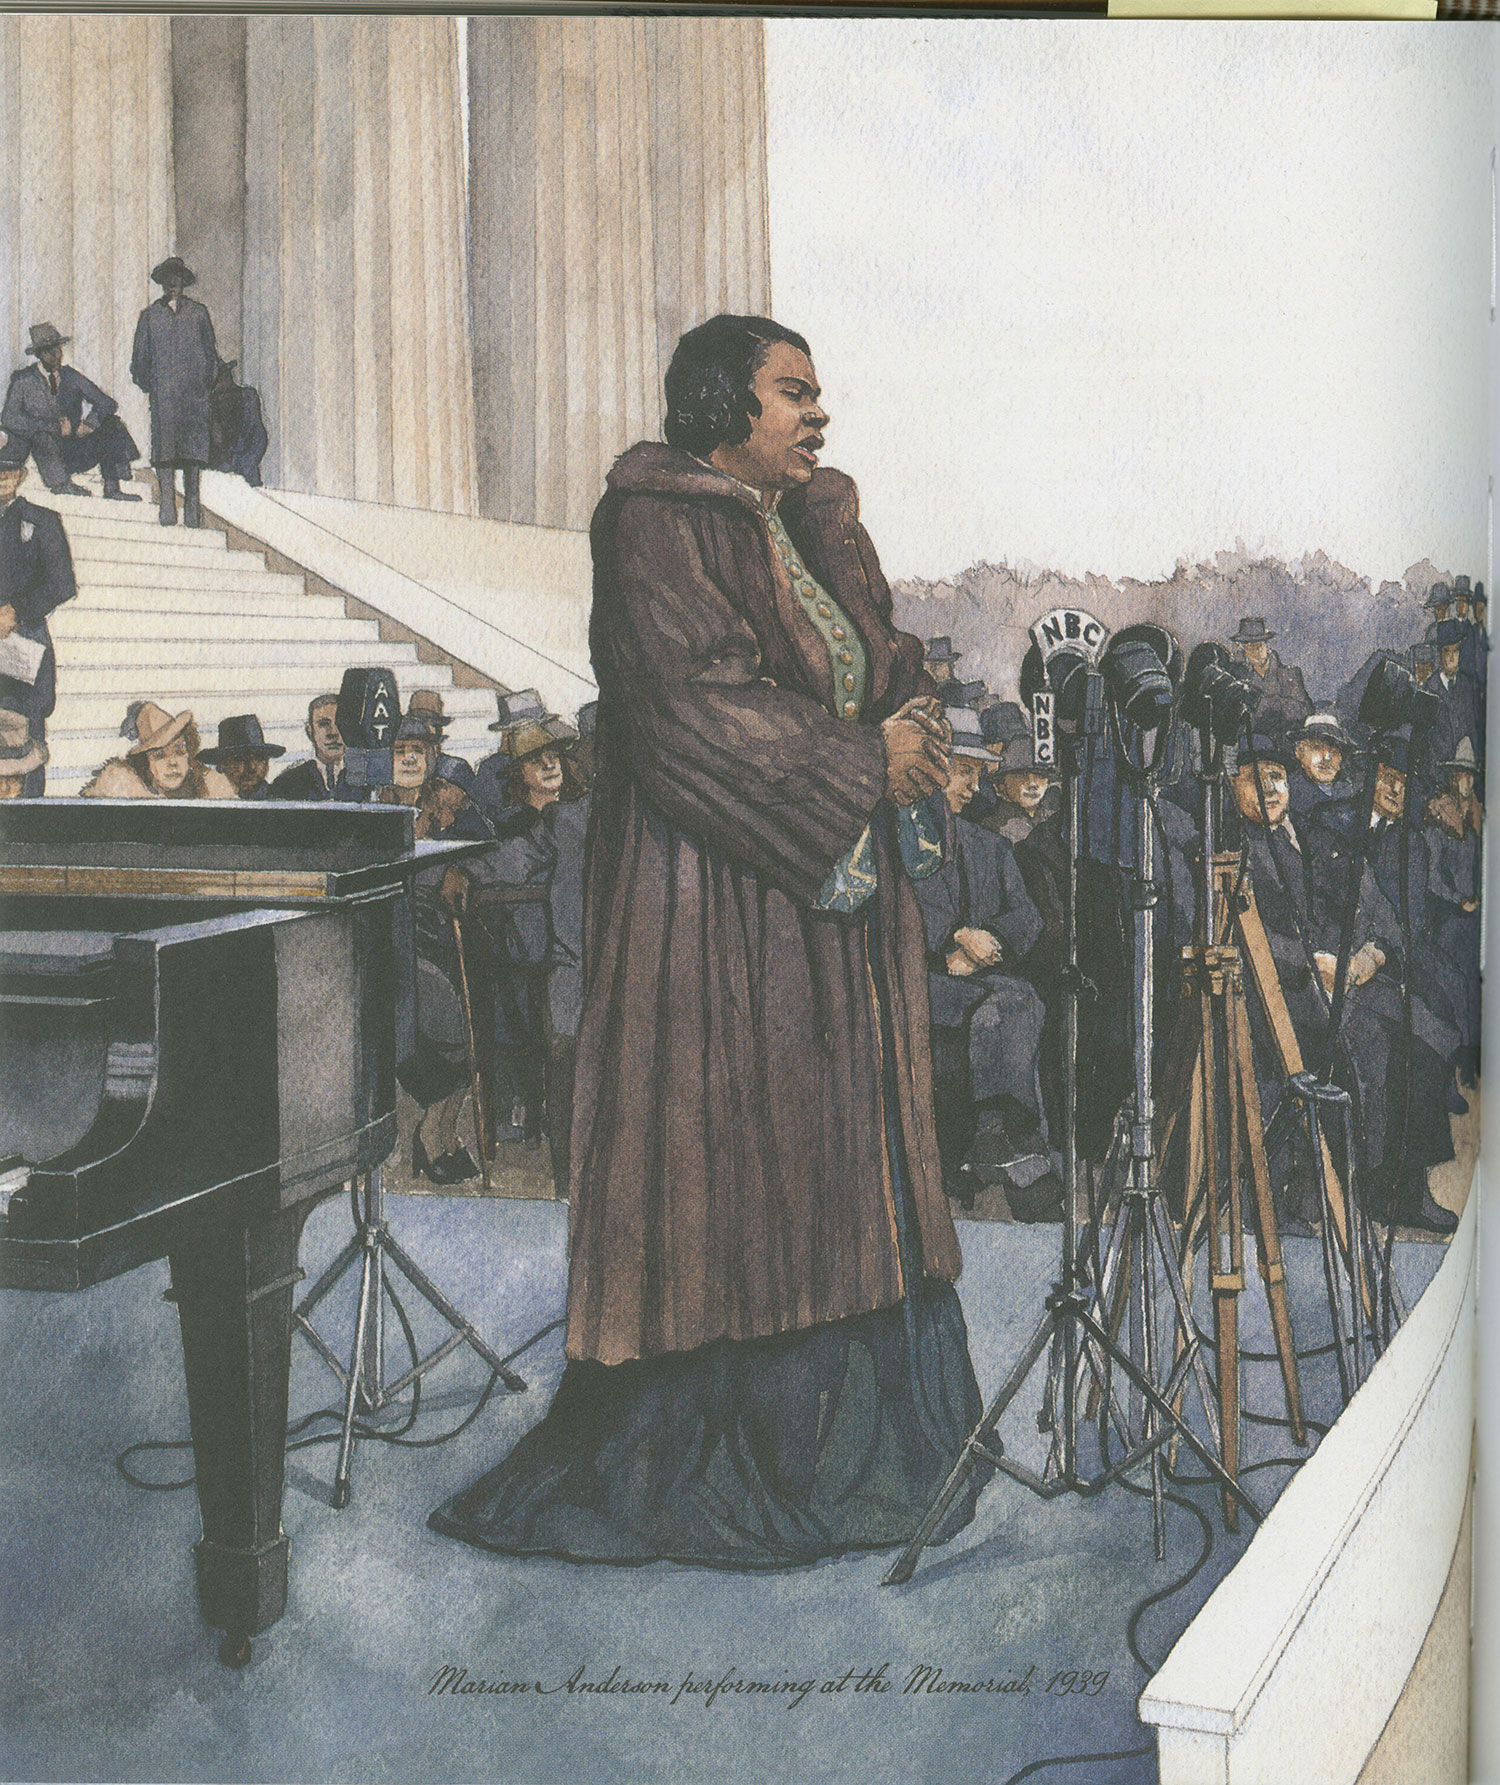 Marian Anderson Performing at the Lincoln Memorial, 1939